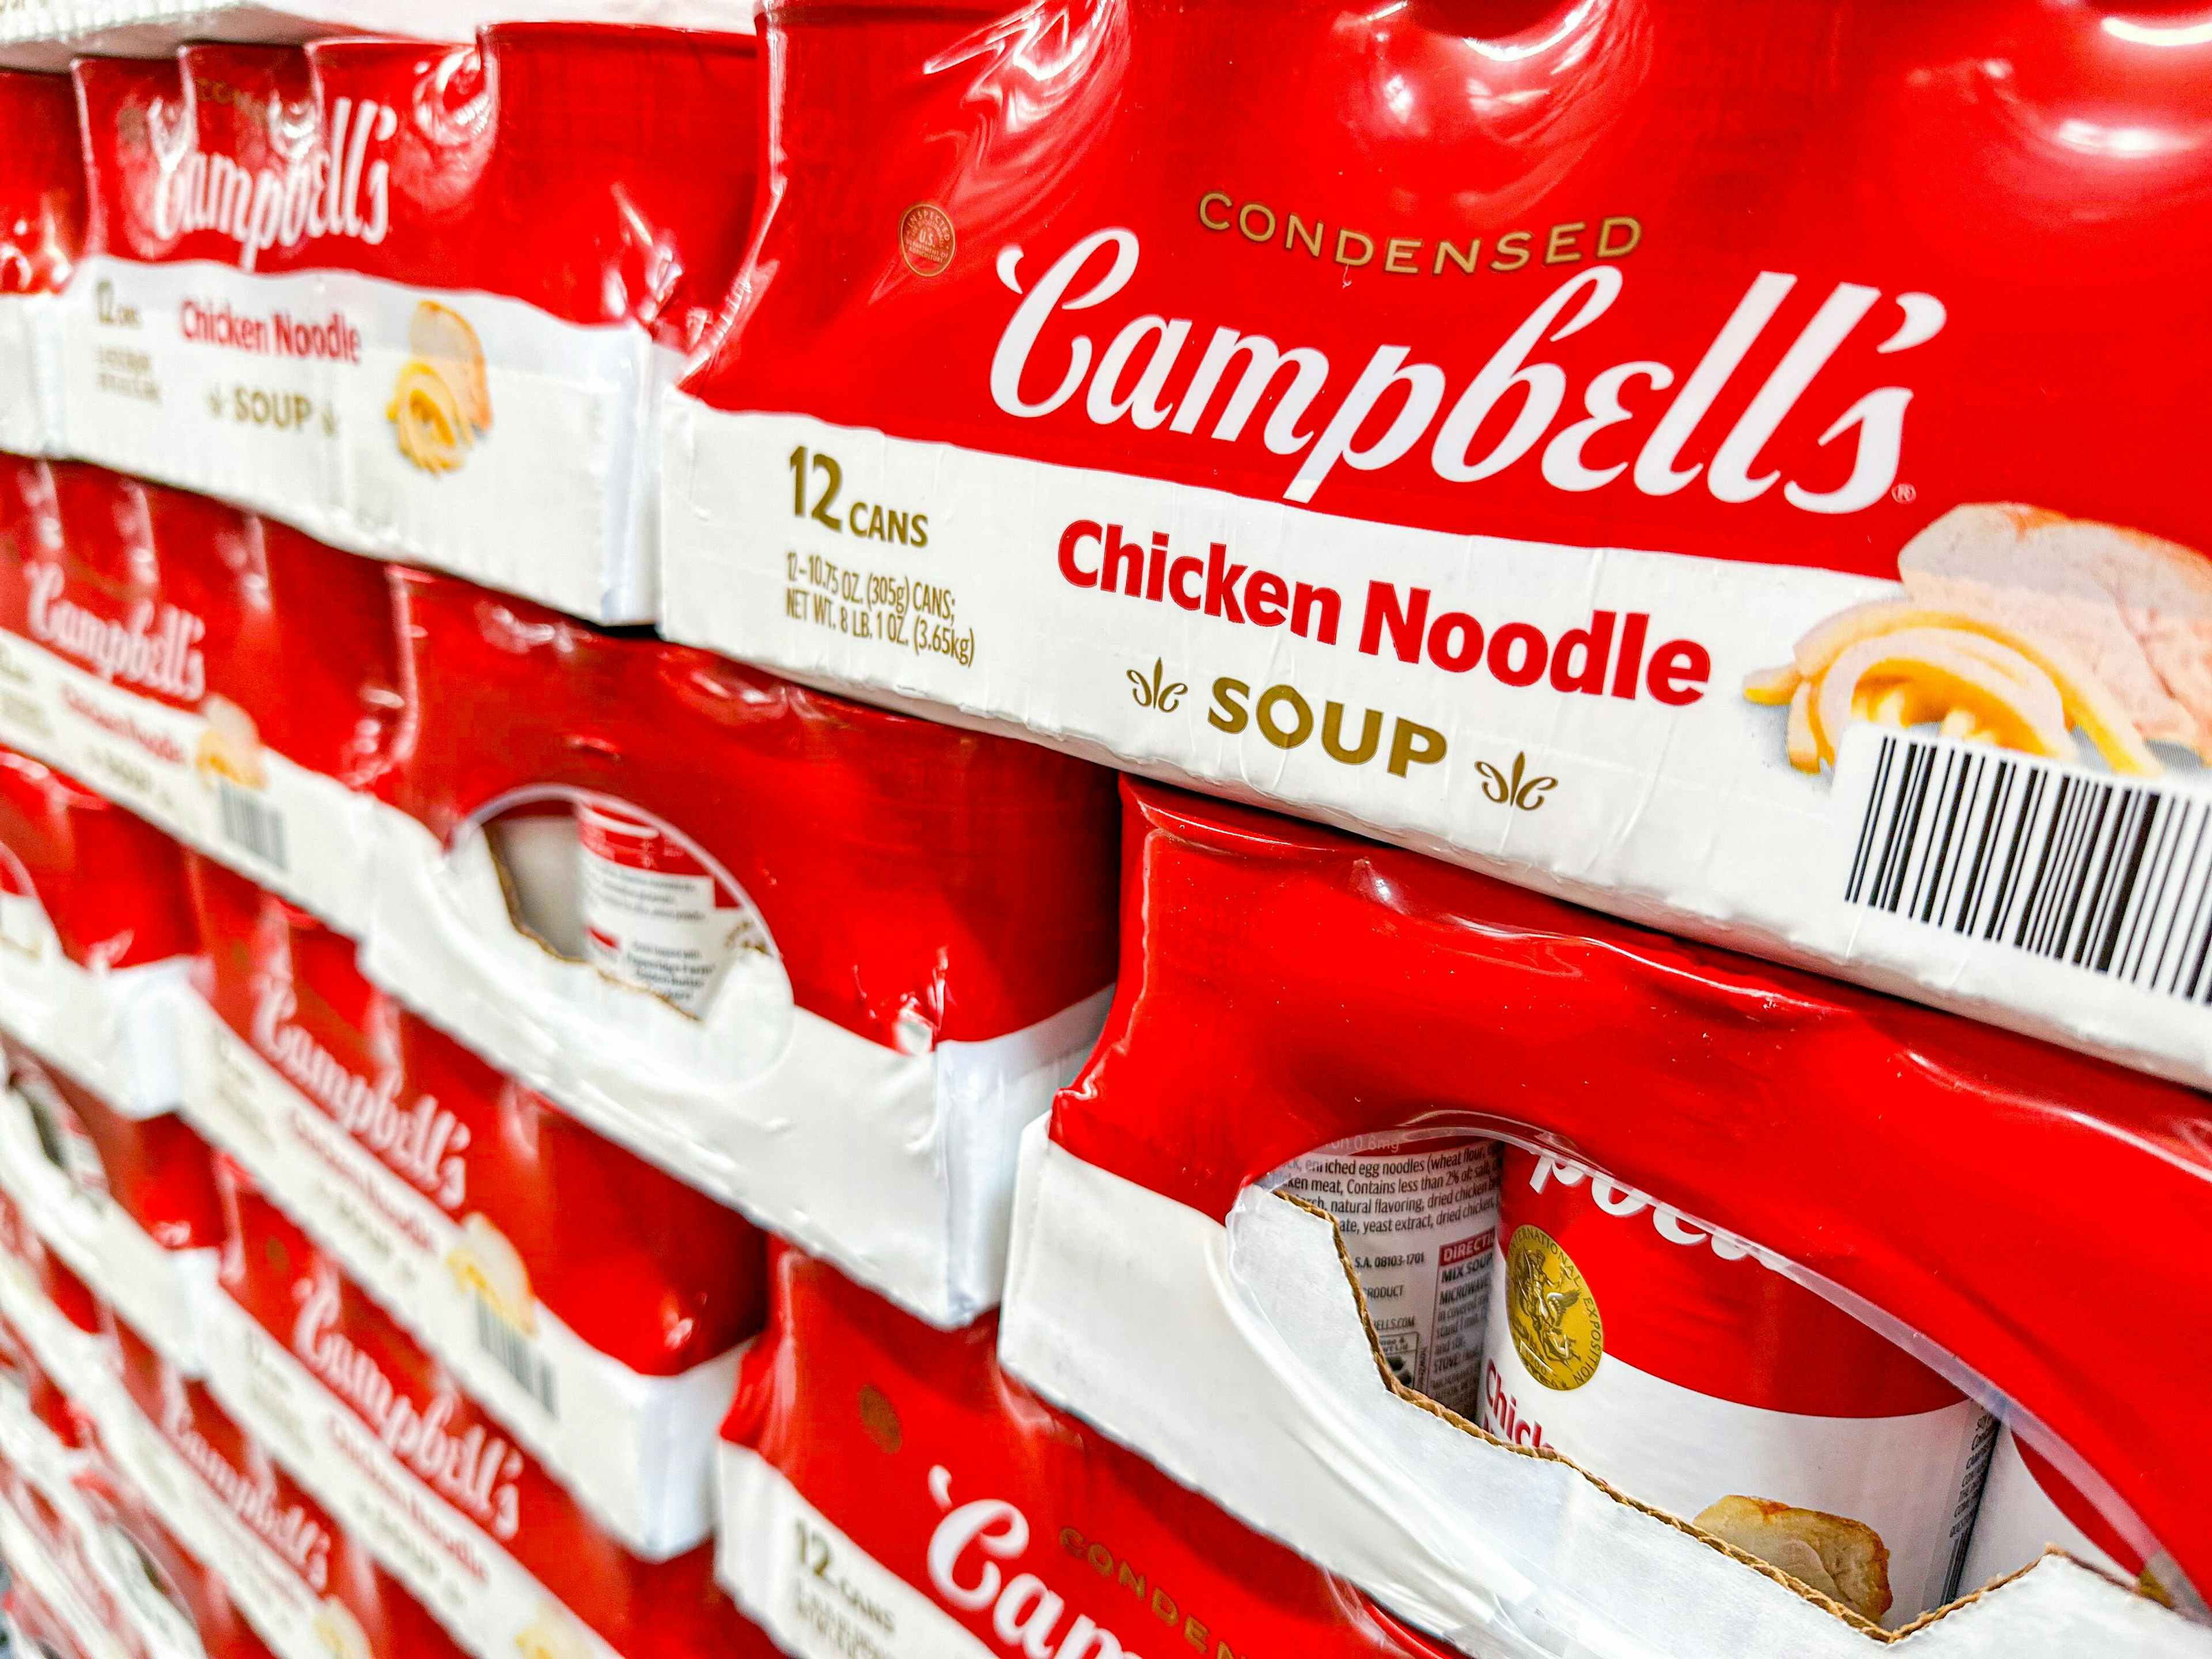 best-things-to-buy-at-sams-club-campbells-chicken-noodle-canned-soup-kcl-12